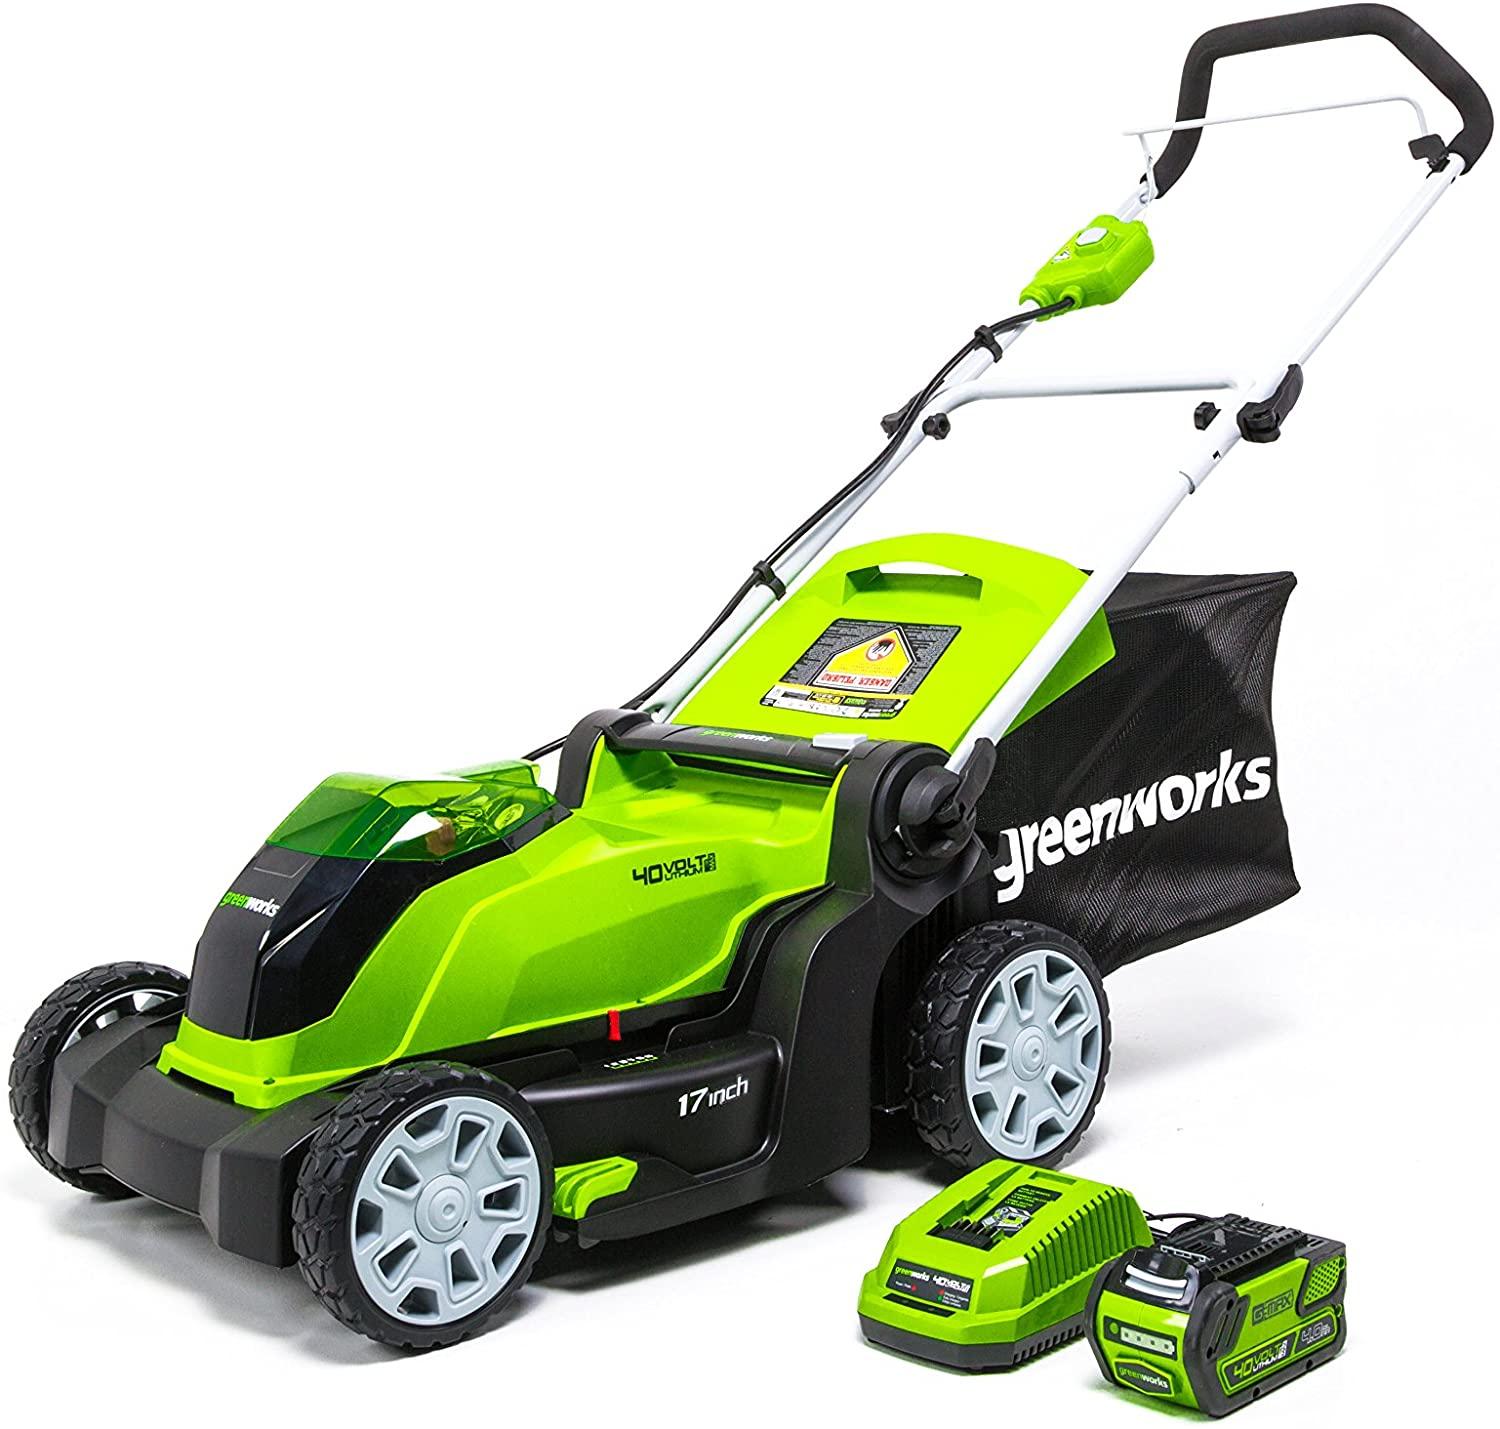 Greenworks G-MAX 40V 17in Brushed Mower for $223.20 Shipped